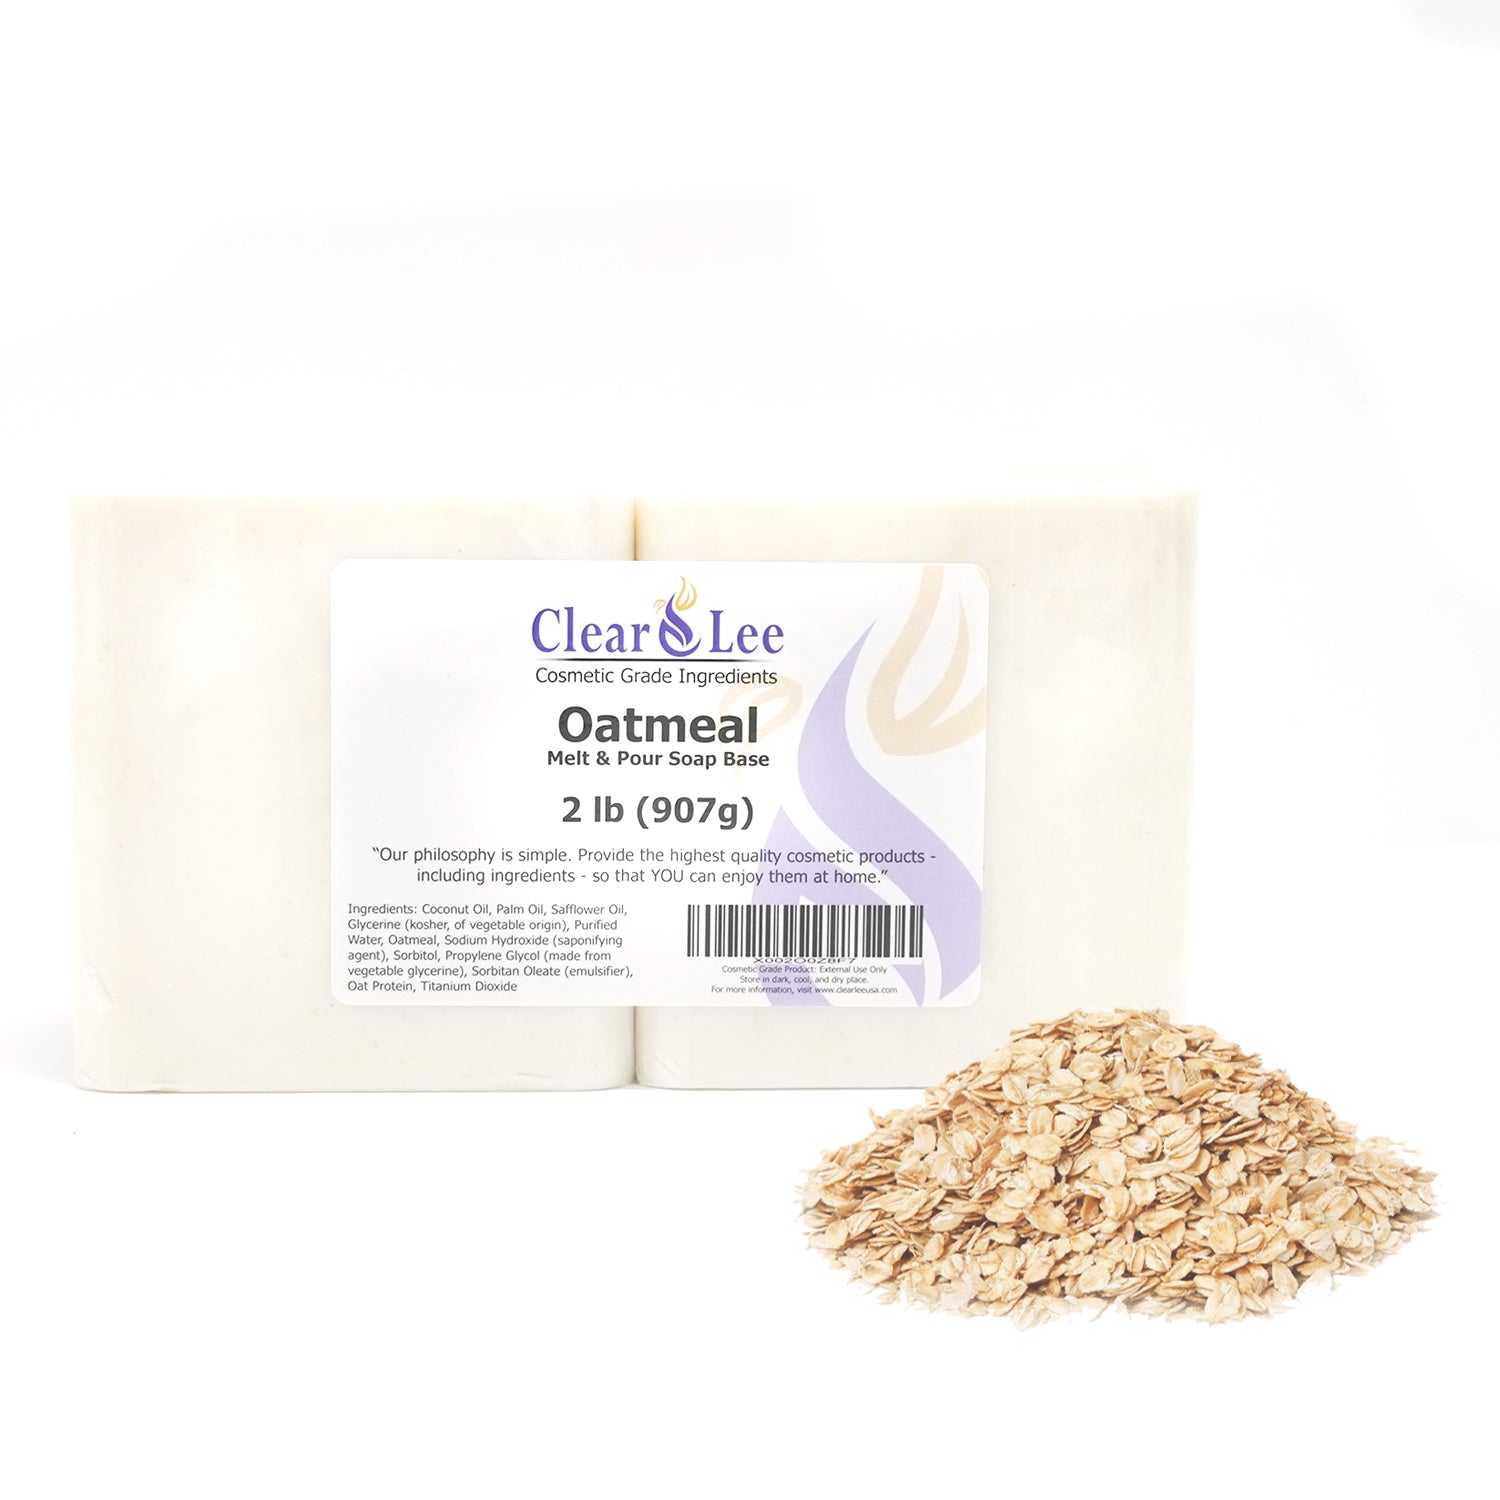 Oatmeal Melt & Pour Soap Crafter's Choice 2 lbs.